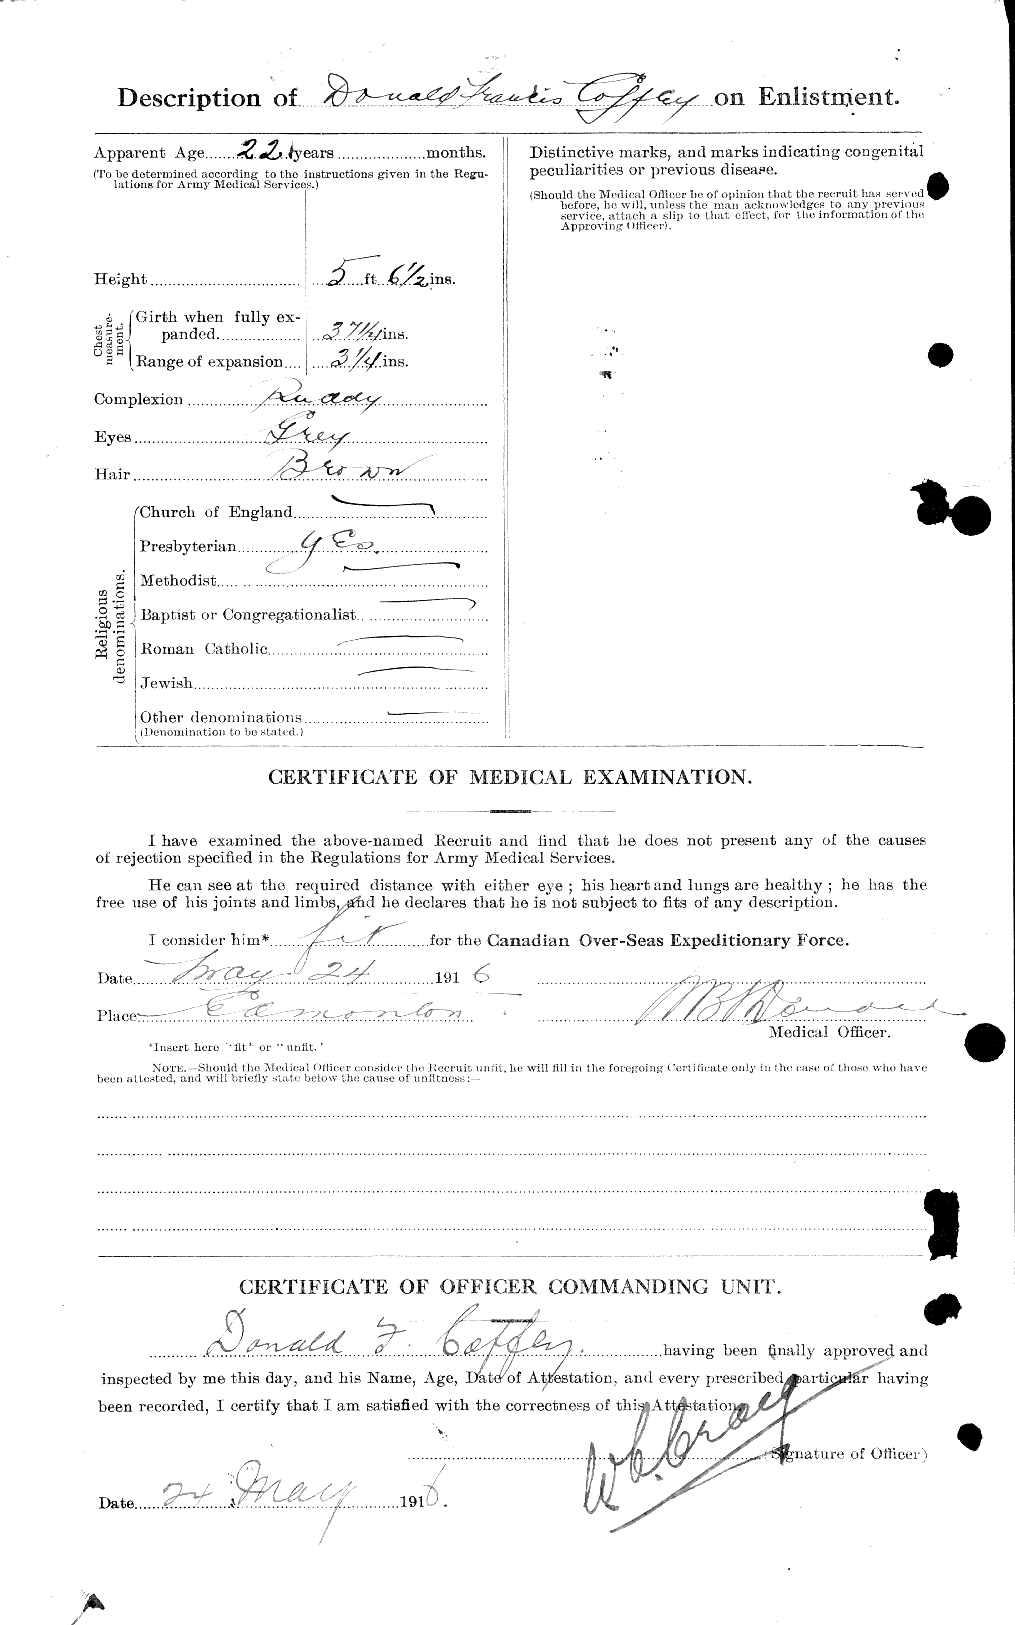 Personnel Records of the First World War - CEF 027011b